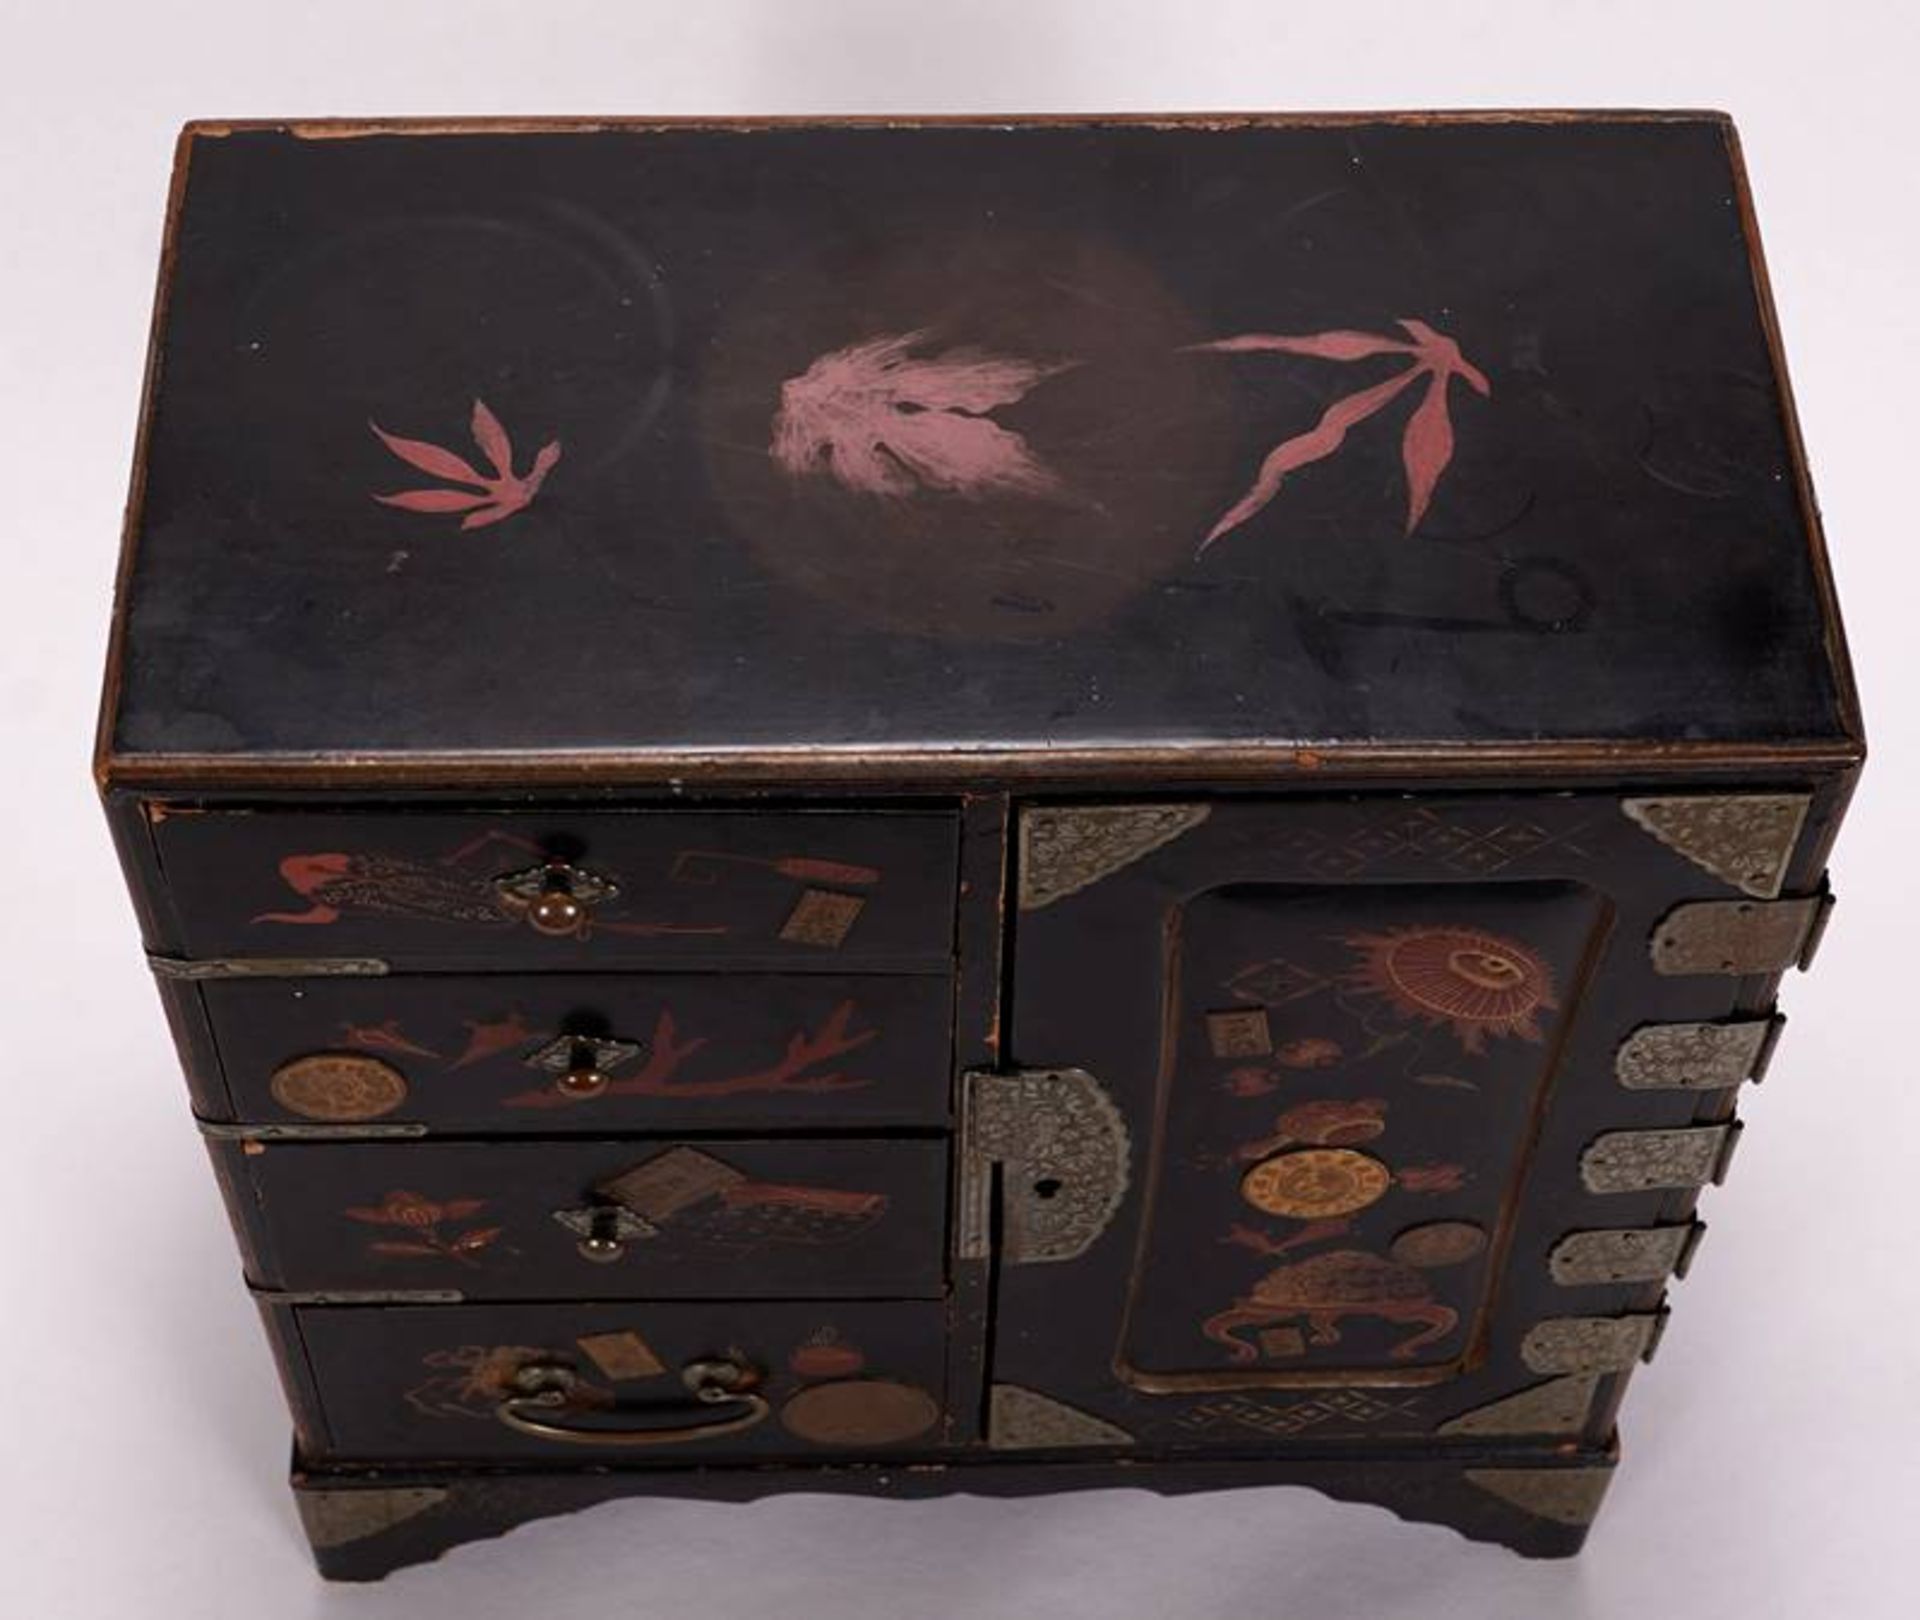 Japanese lacquer cabinet - Image 5 of 6